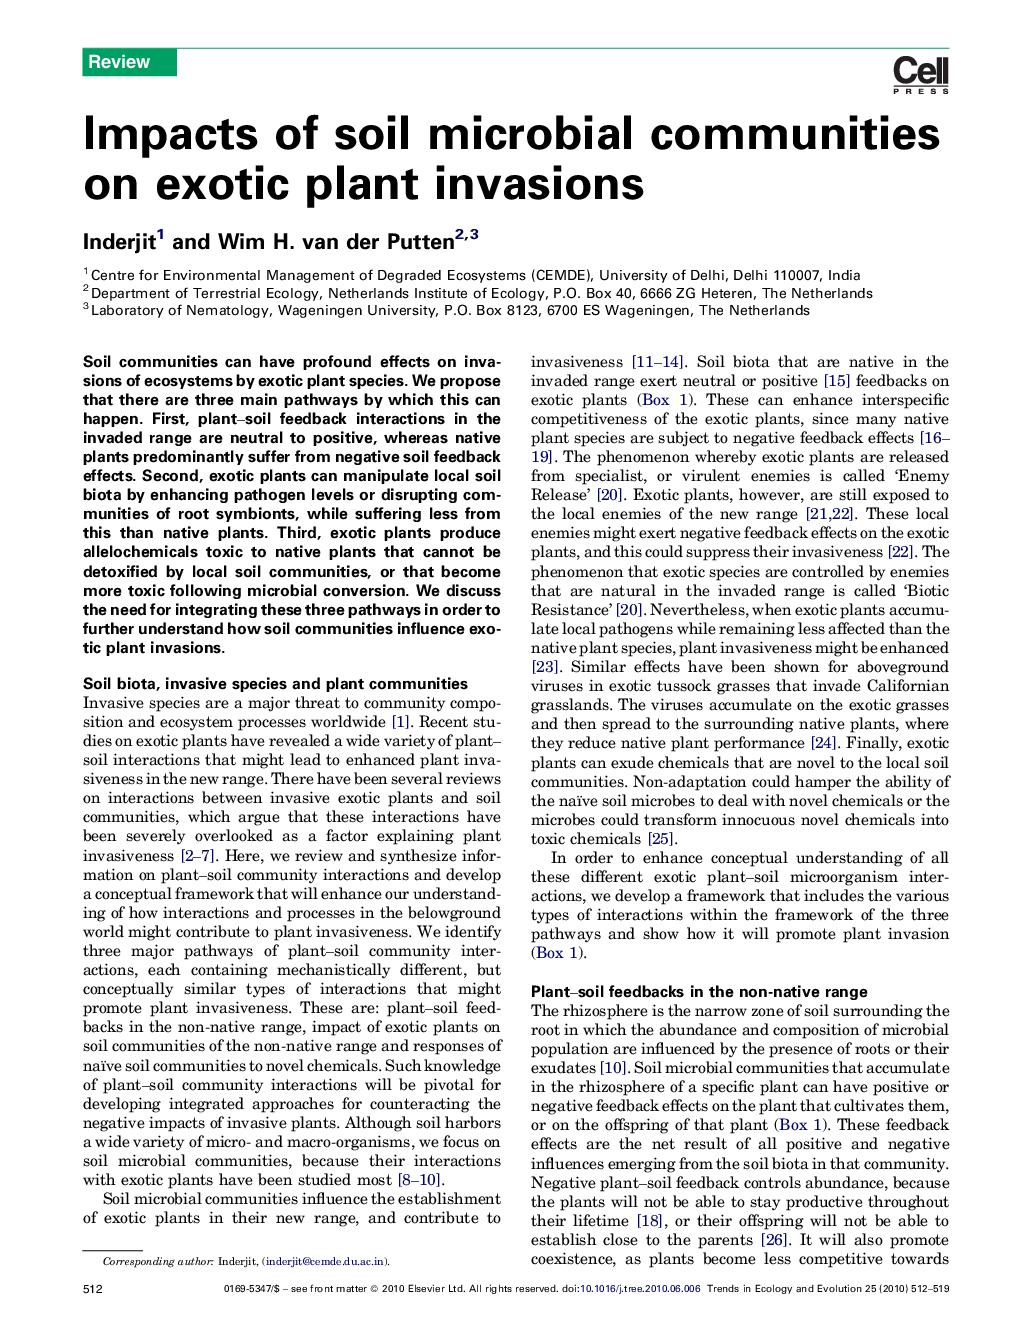 Impacts of soil microbial communities on exotic plant invasions